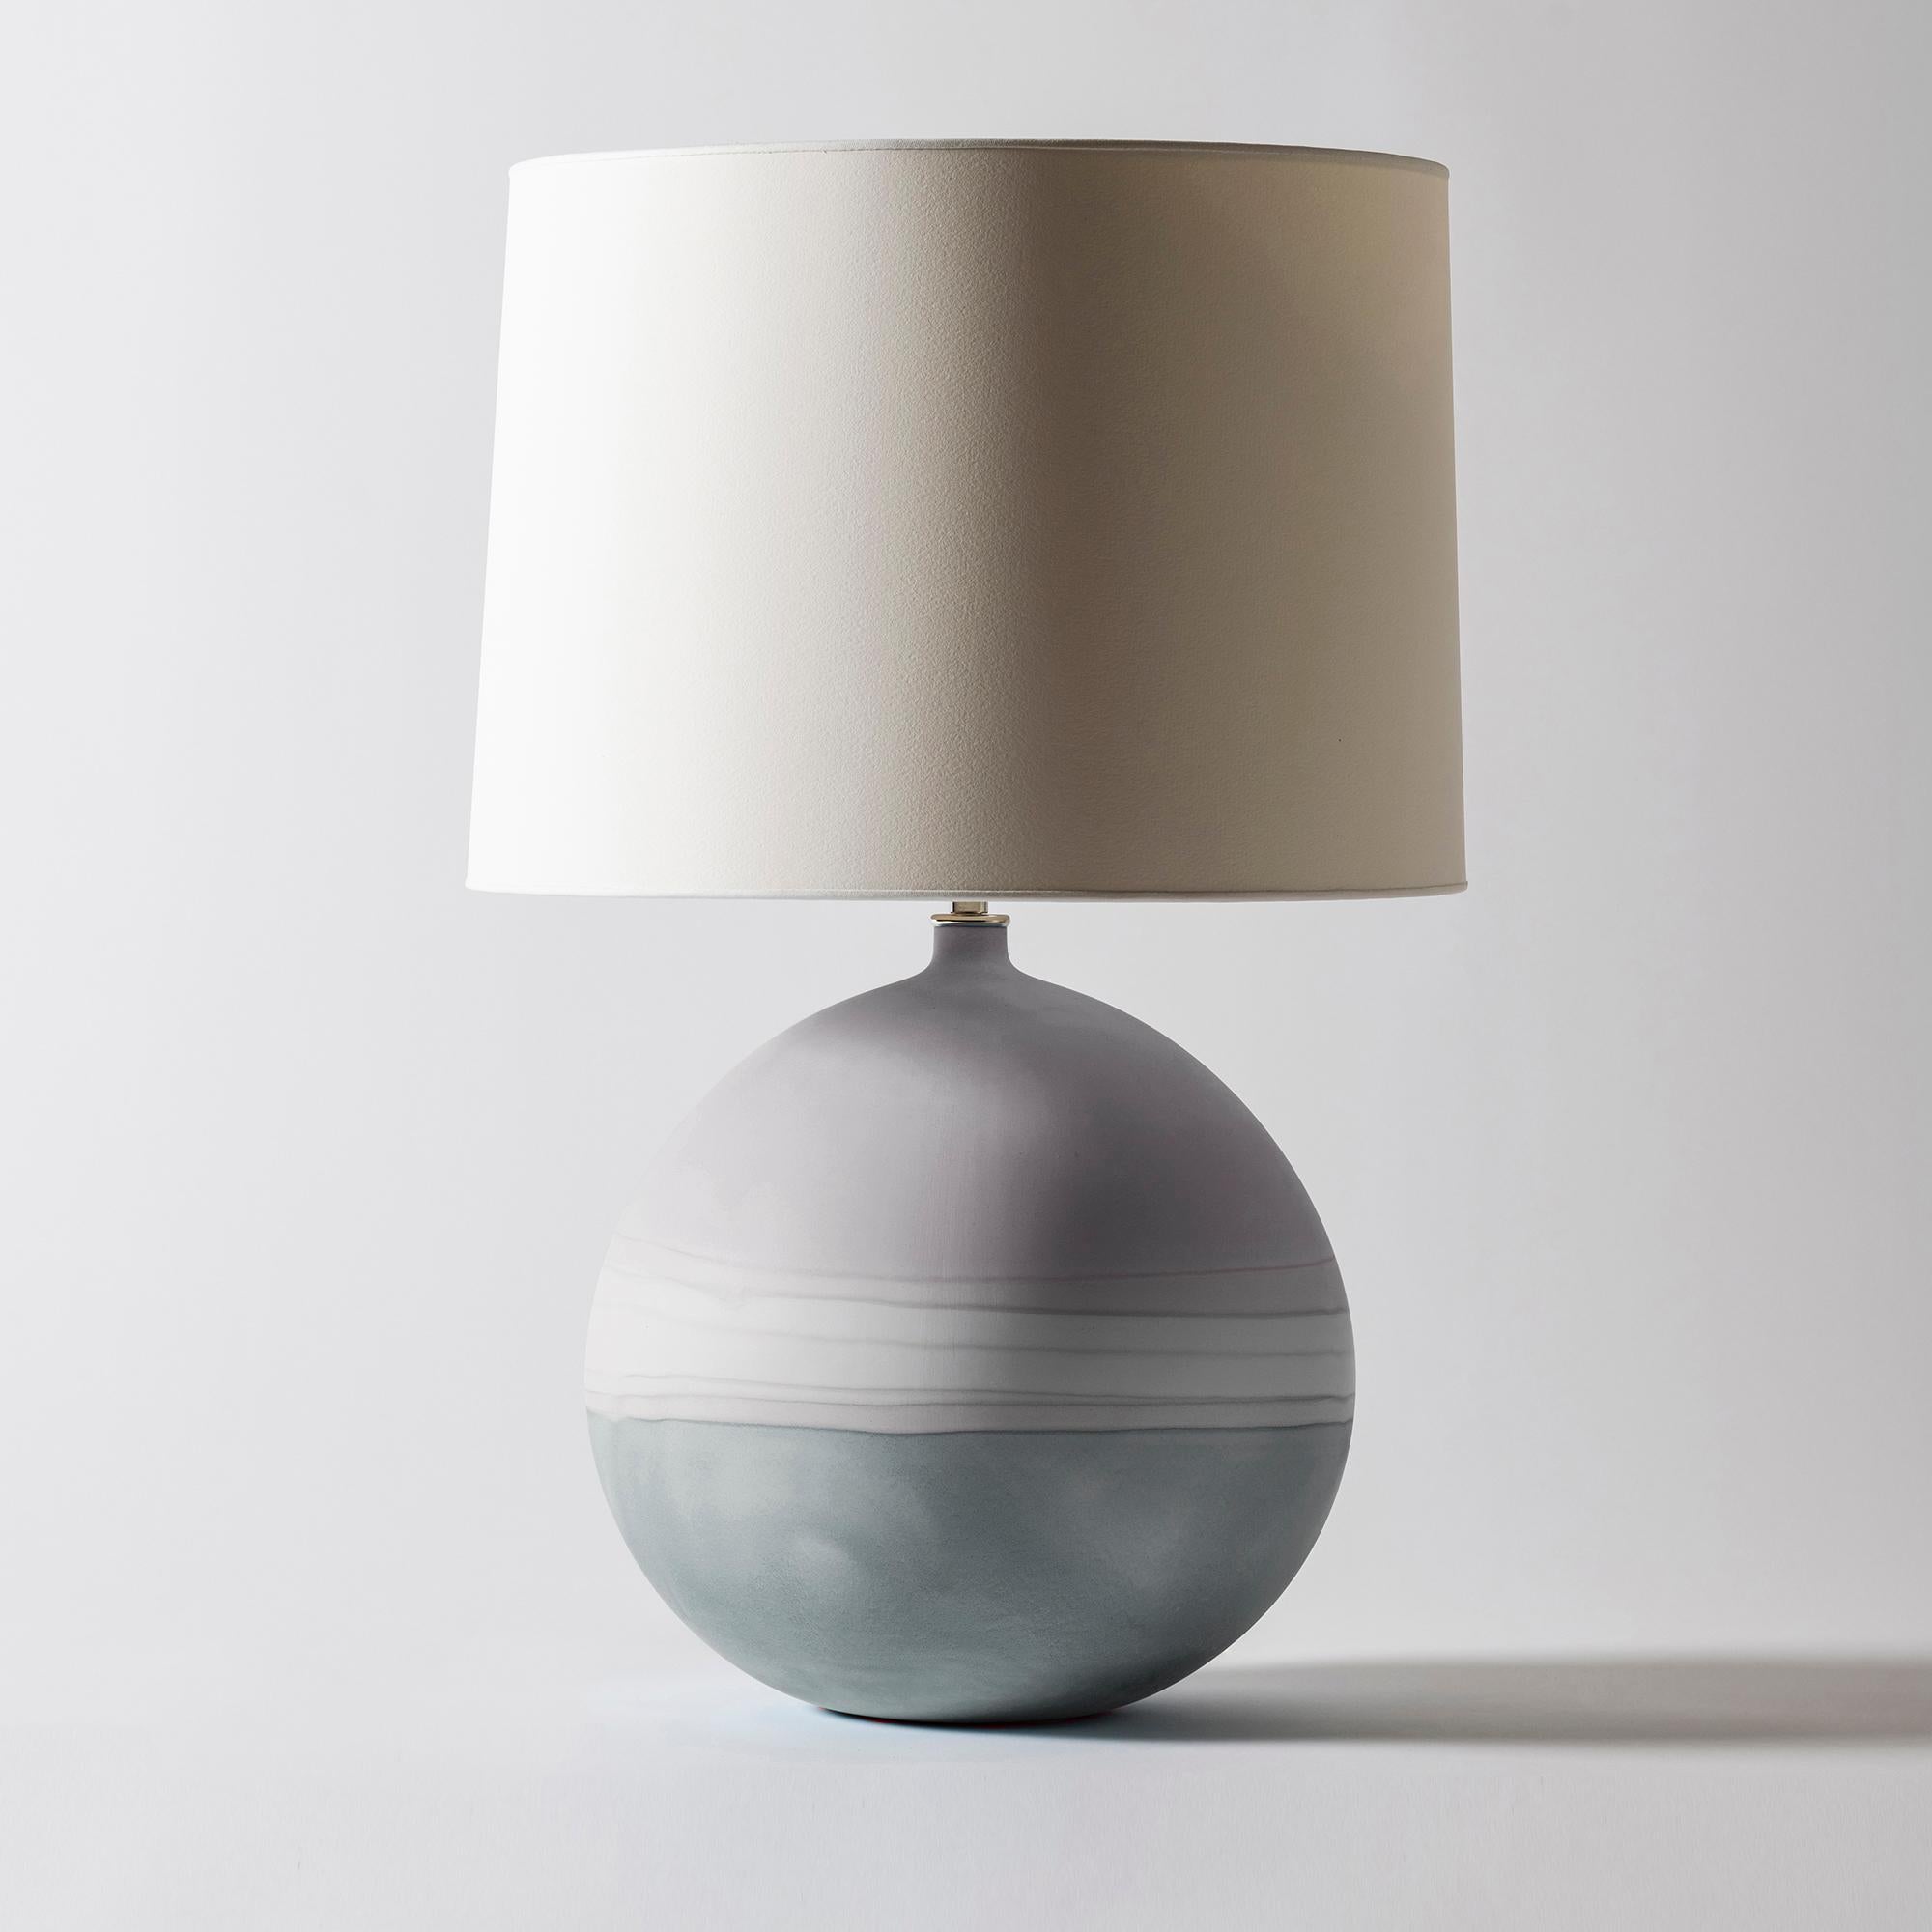 Jupiter lamp in Grey Ombré by Elyse Graham
Dimensions: D38 x H61 cm
Materials: Plaster, Resin, Cotton rag Paper, brass, Nickel. HARDWARE: POLISHED NICKEL-PLATED BRASS UNO THREADED SOCKET
with TURN KEY SWITCH, IN-LINE DIMMER.
MOLDED, DYED, AND